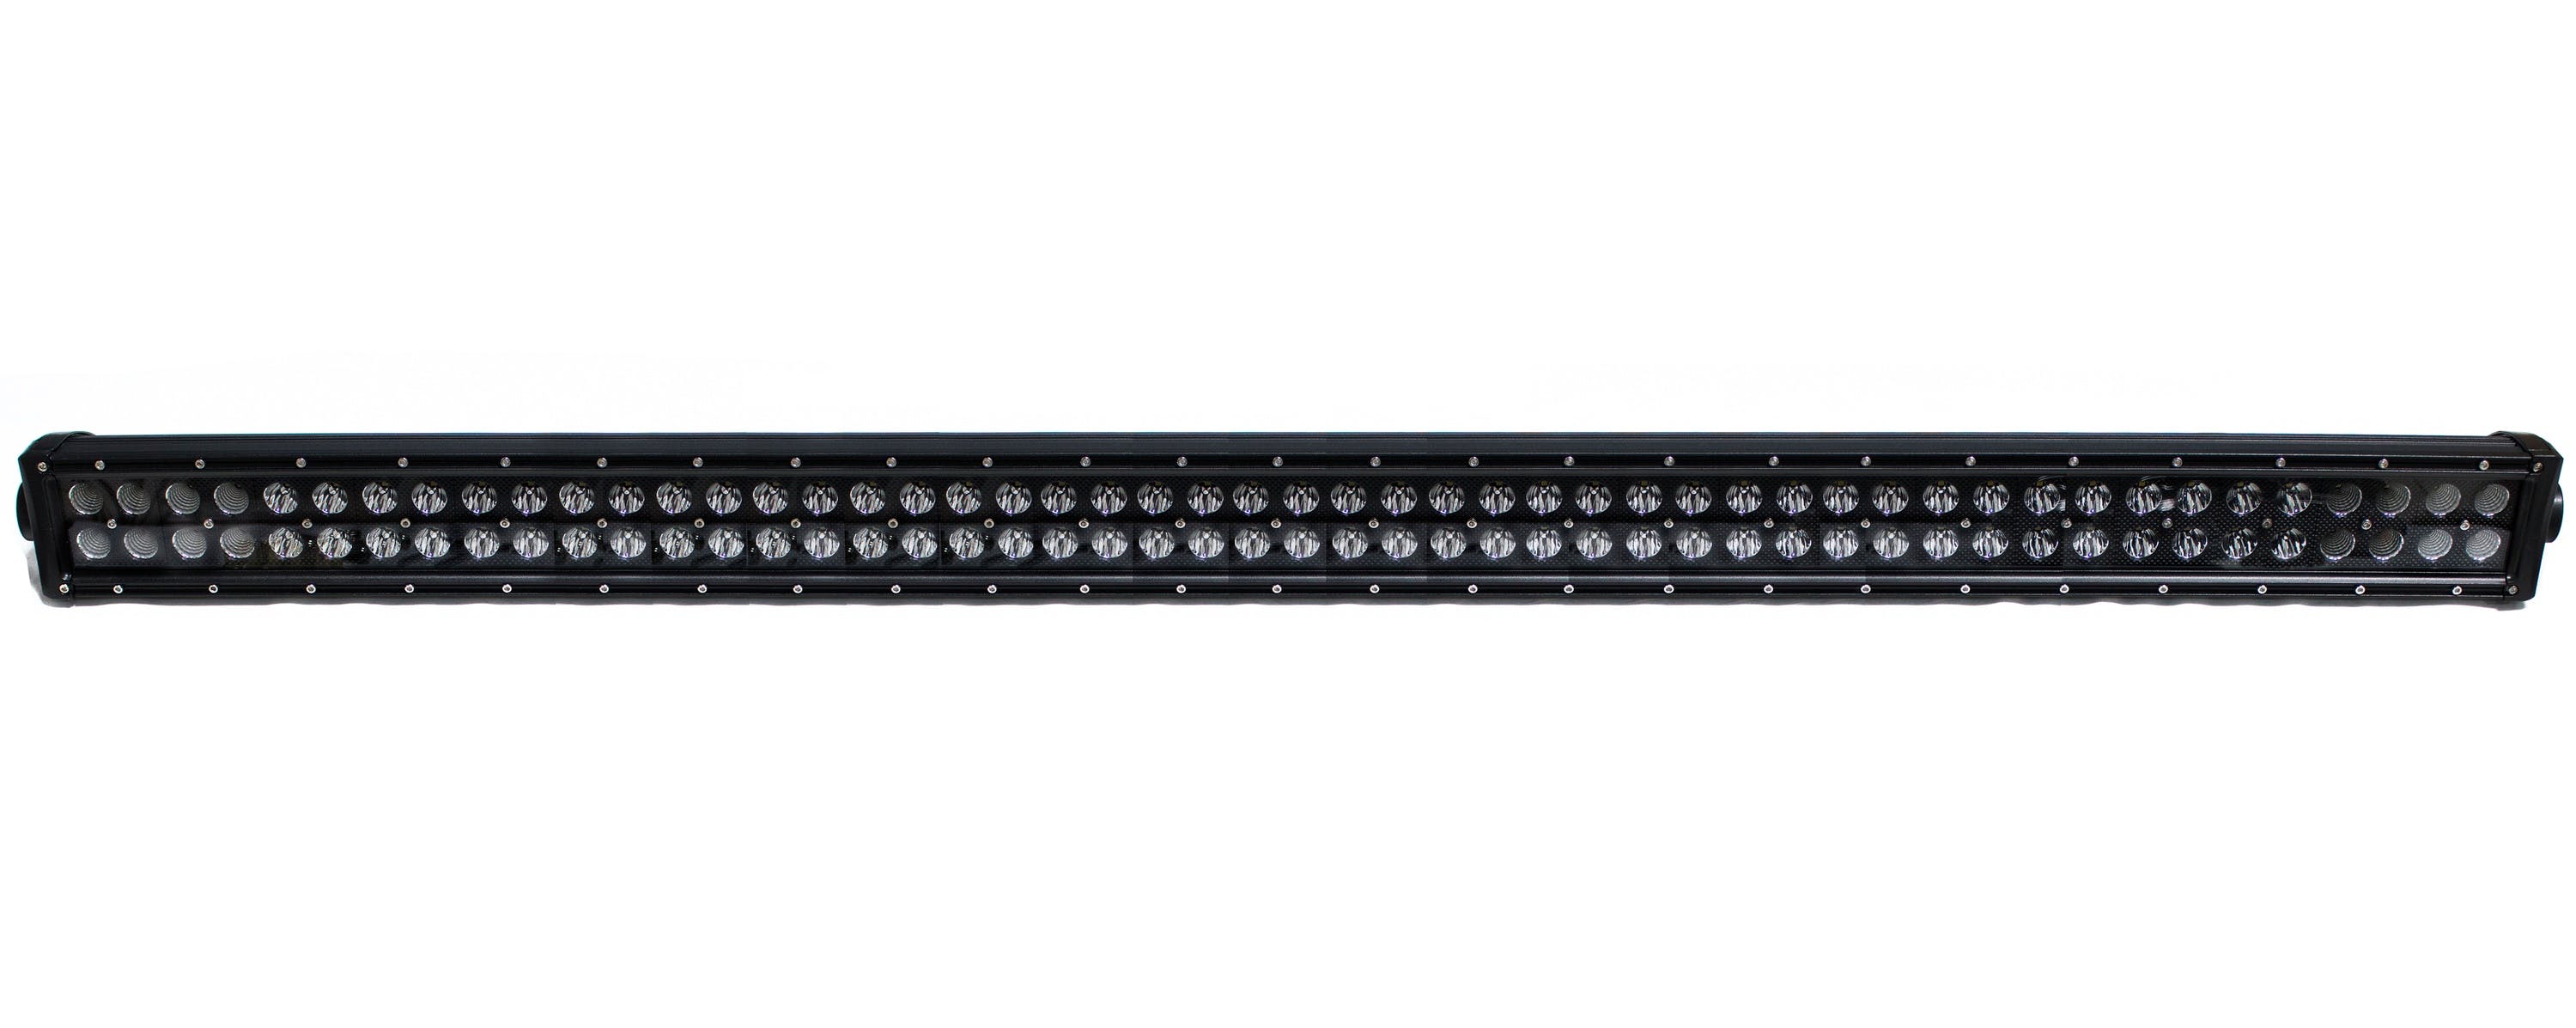 Race Sport Lighting RSBO300 Blacked Out Series 52in Straight, Double Row, Silver Combo-Flood/Beam